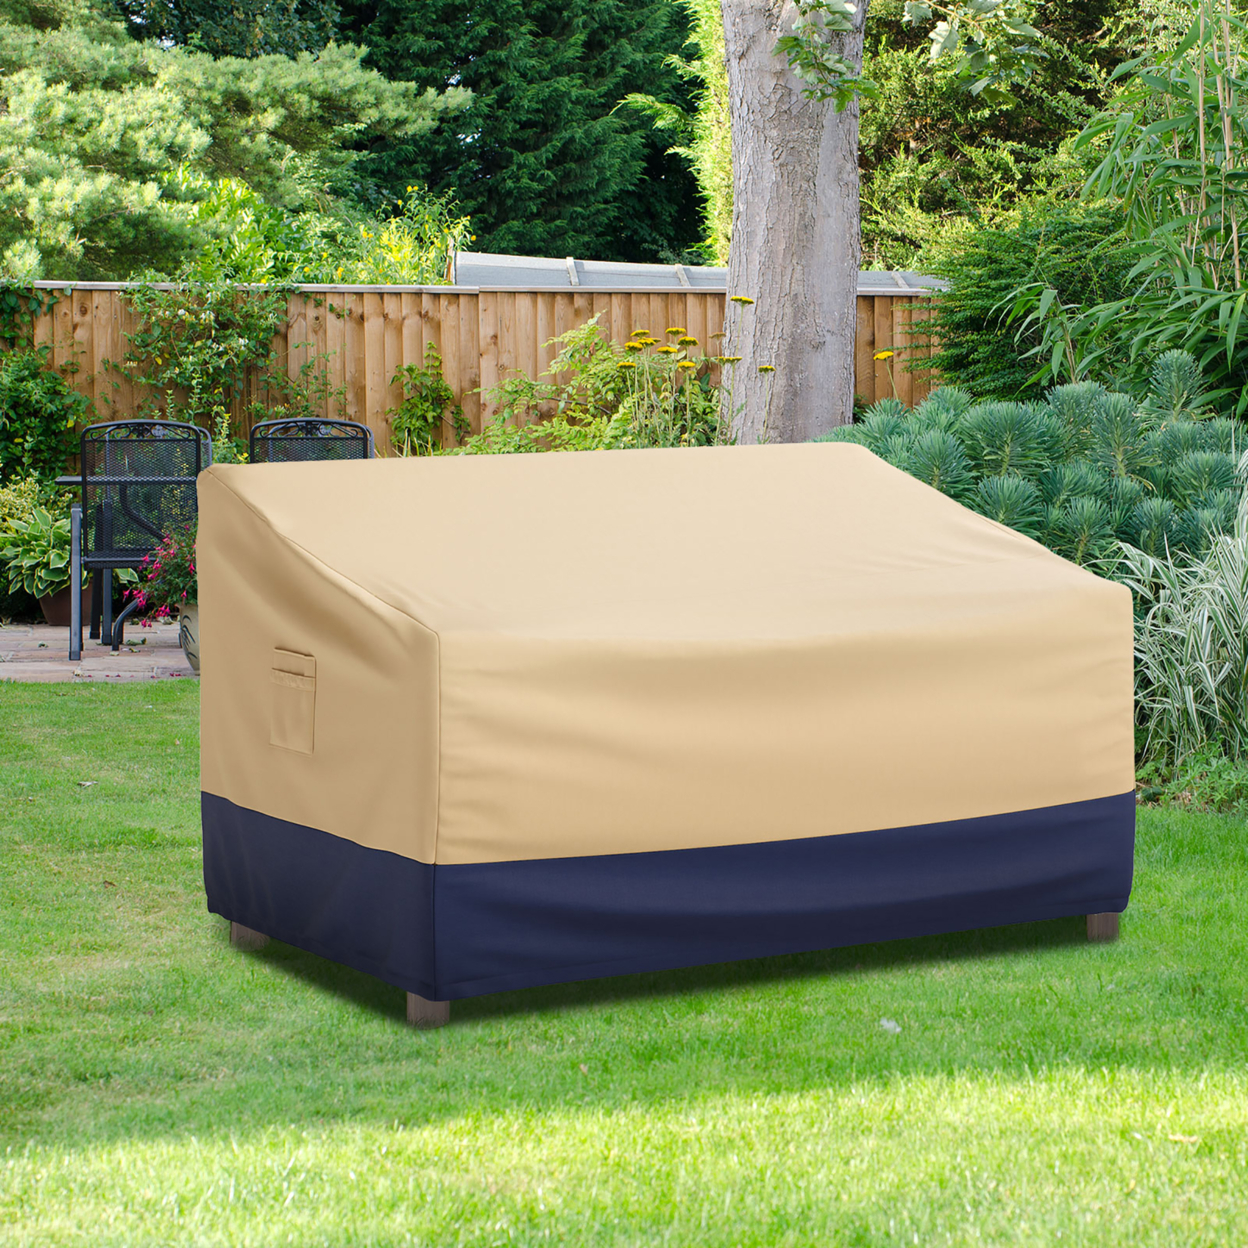 2-Seater Patio Waterproof Sofa Cover Polyester Sofa Cover W/ Air Vents & Handles